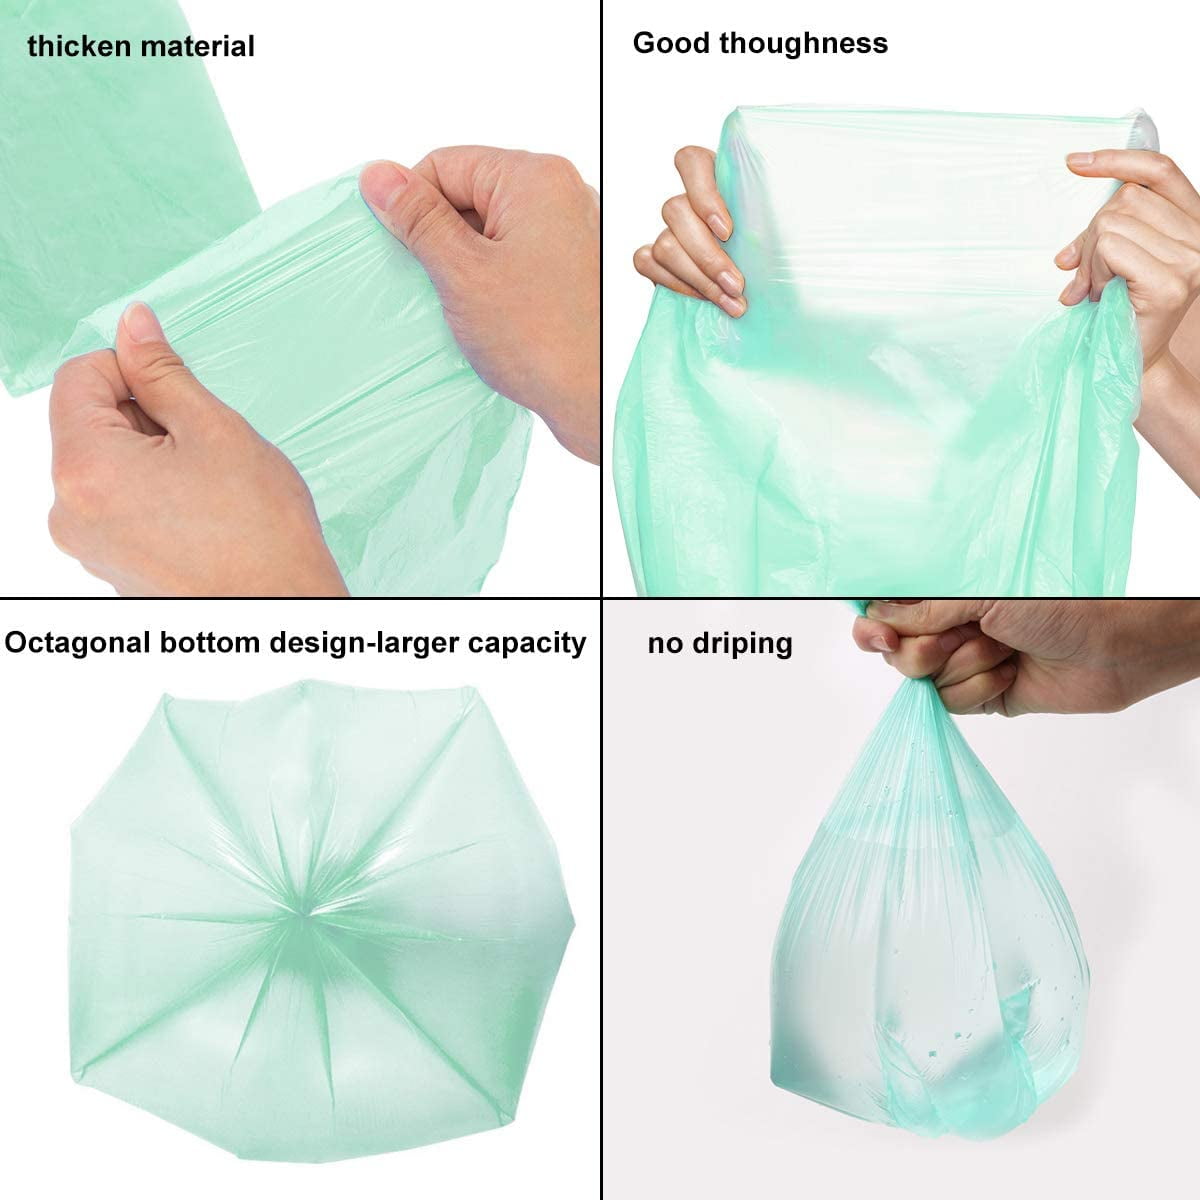 1.2 Gallon 120 Clear Small Trash Bags Bathroom 1 Gallon Garbage Bags Plastic Wastebasket Mini Trash Bags Can Liners for Home and Office Bins, 120